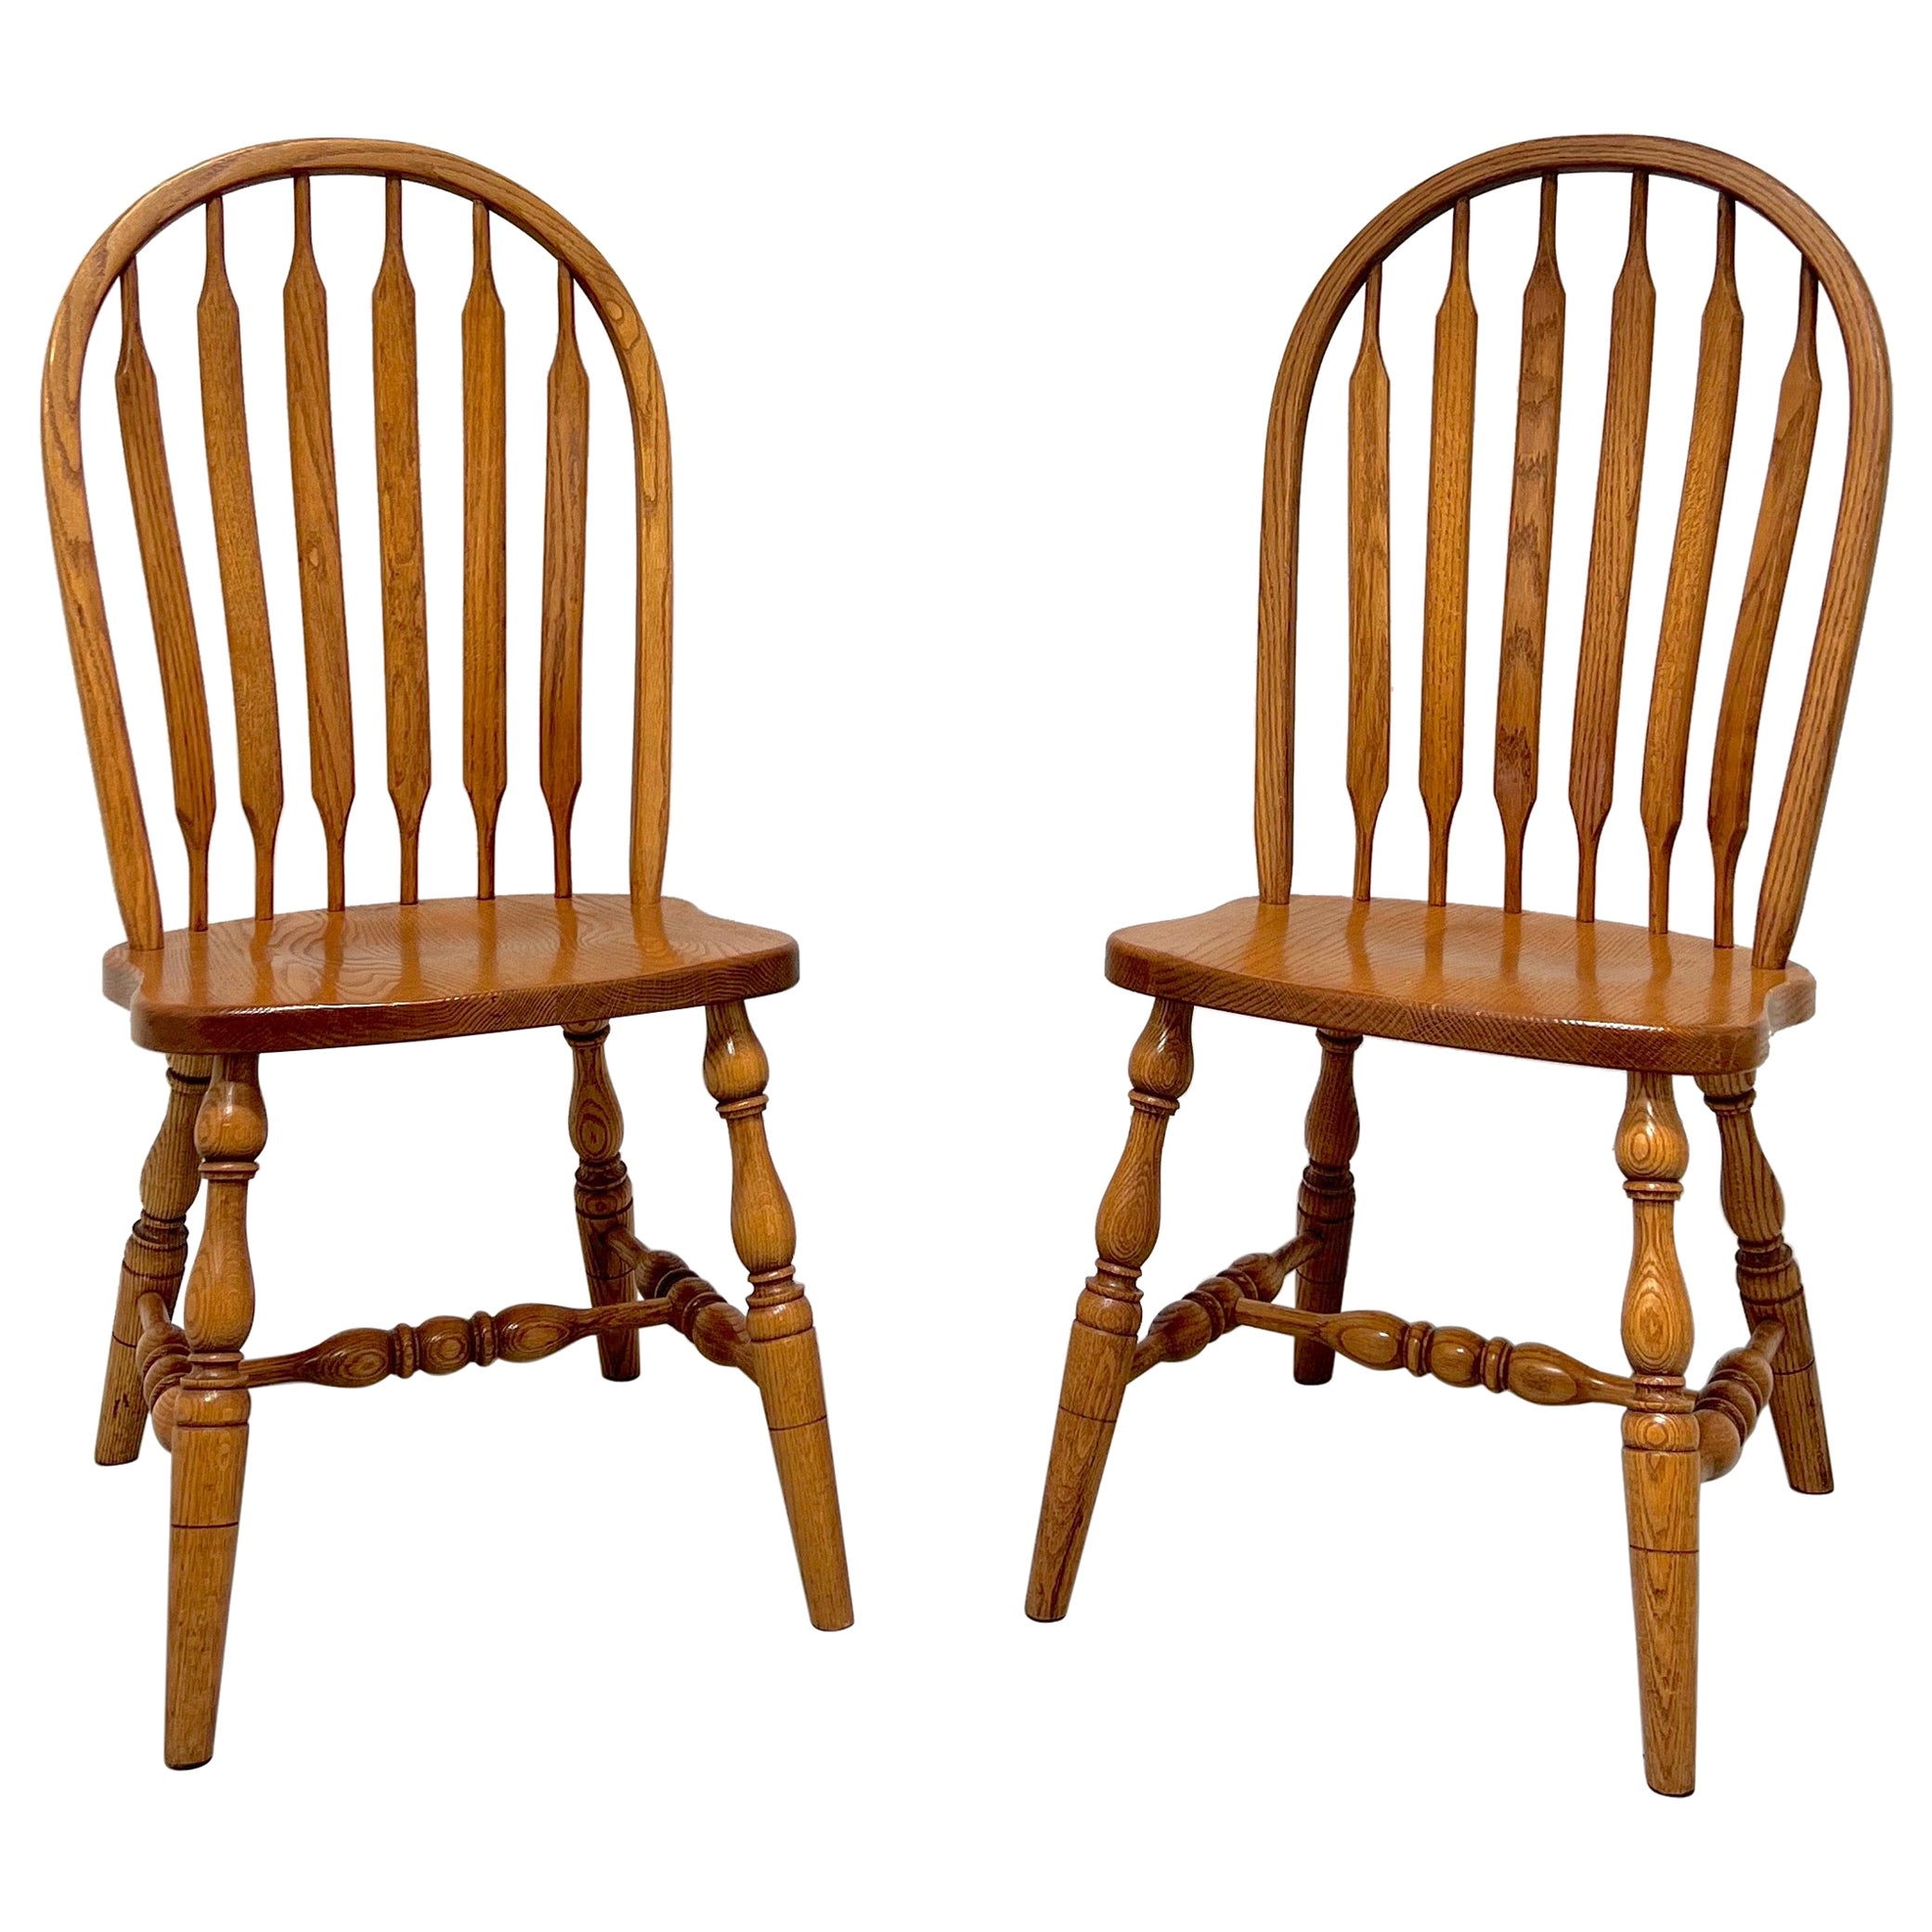 Amish Made Rockford Stil Eiche Windsor Dining Side Chairs - Paar im Angebot